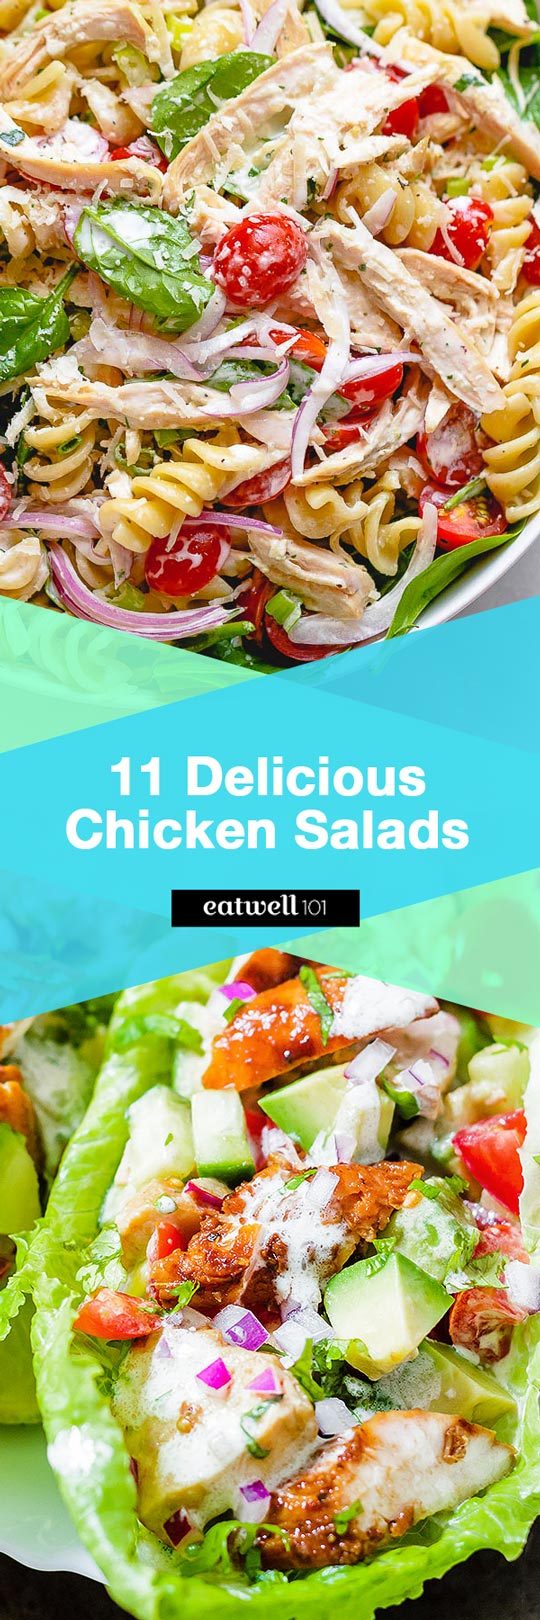 Chicken Salad Recipes - These filling and nutritious salads pack a punch of protein to keep you full for longer.